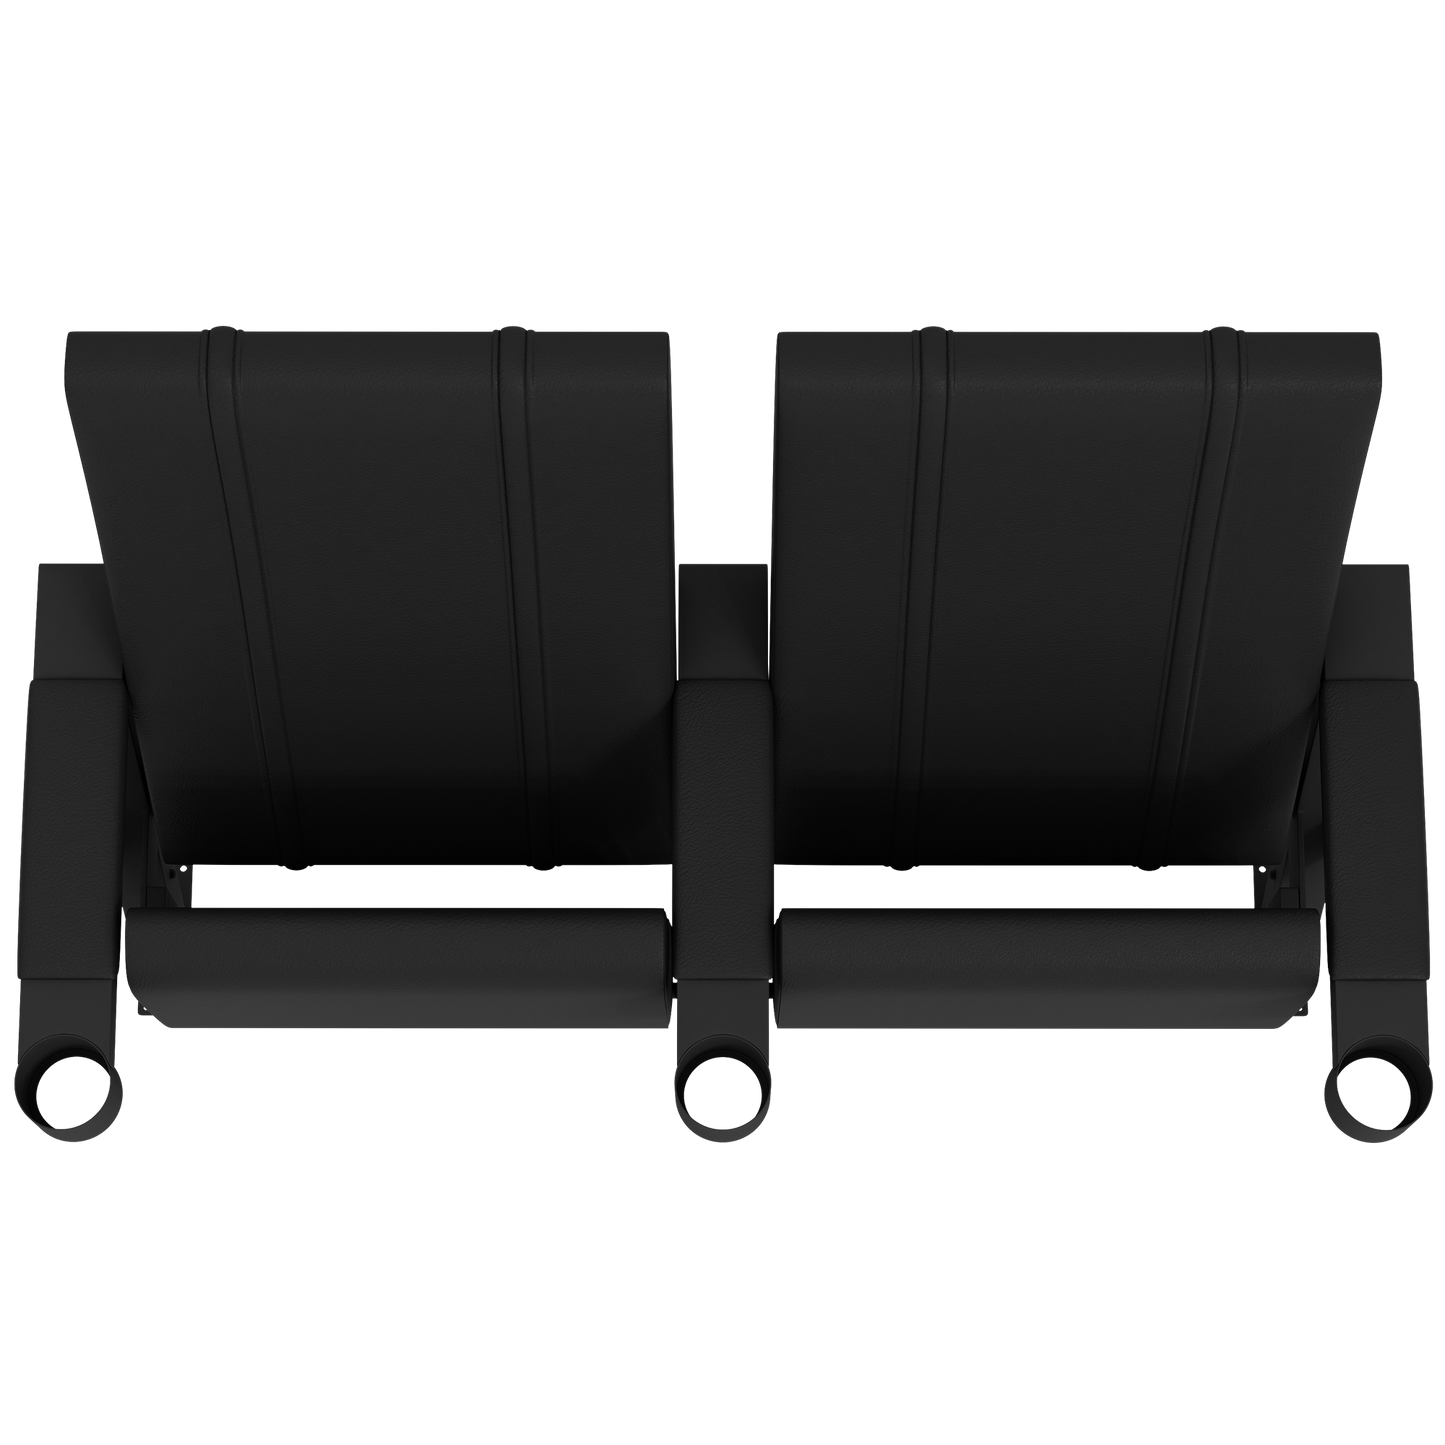 SuiteMax 3.5 VIP Seats with South Dakota Coyotes Logo